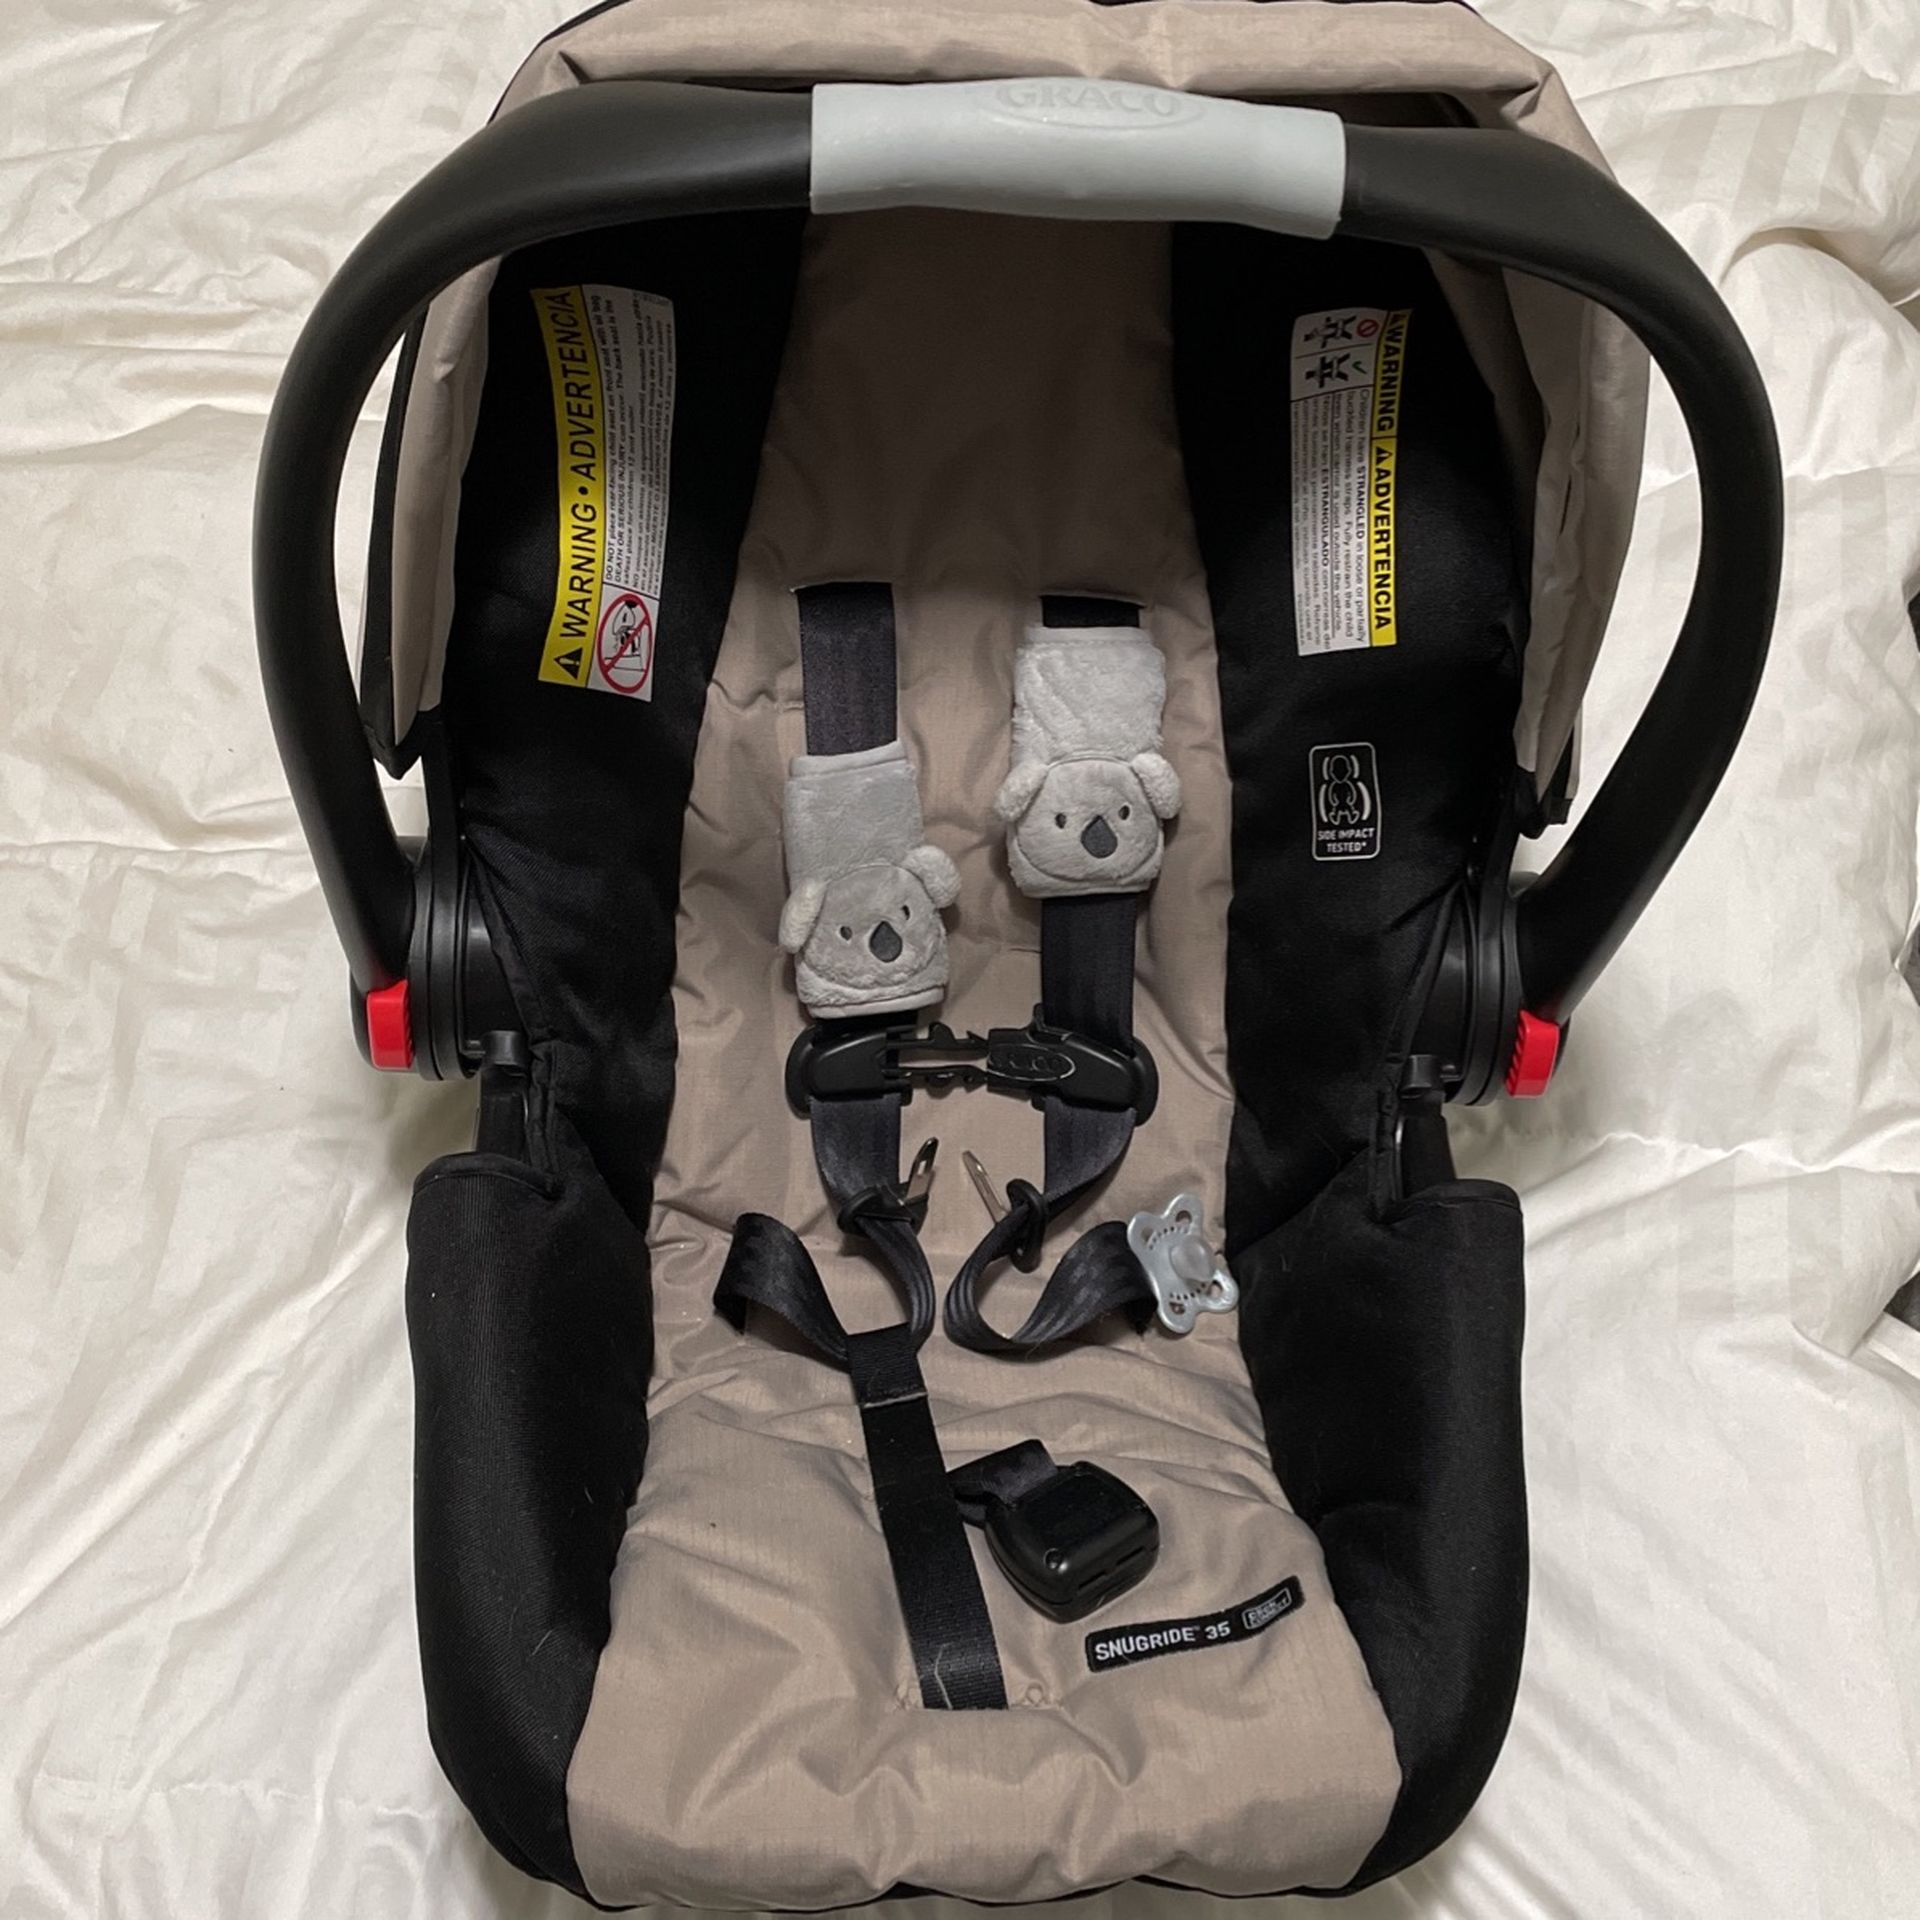 Graco Baby Car seat + stroller attachable base